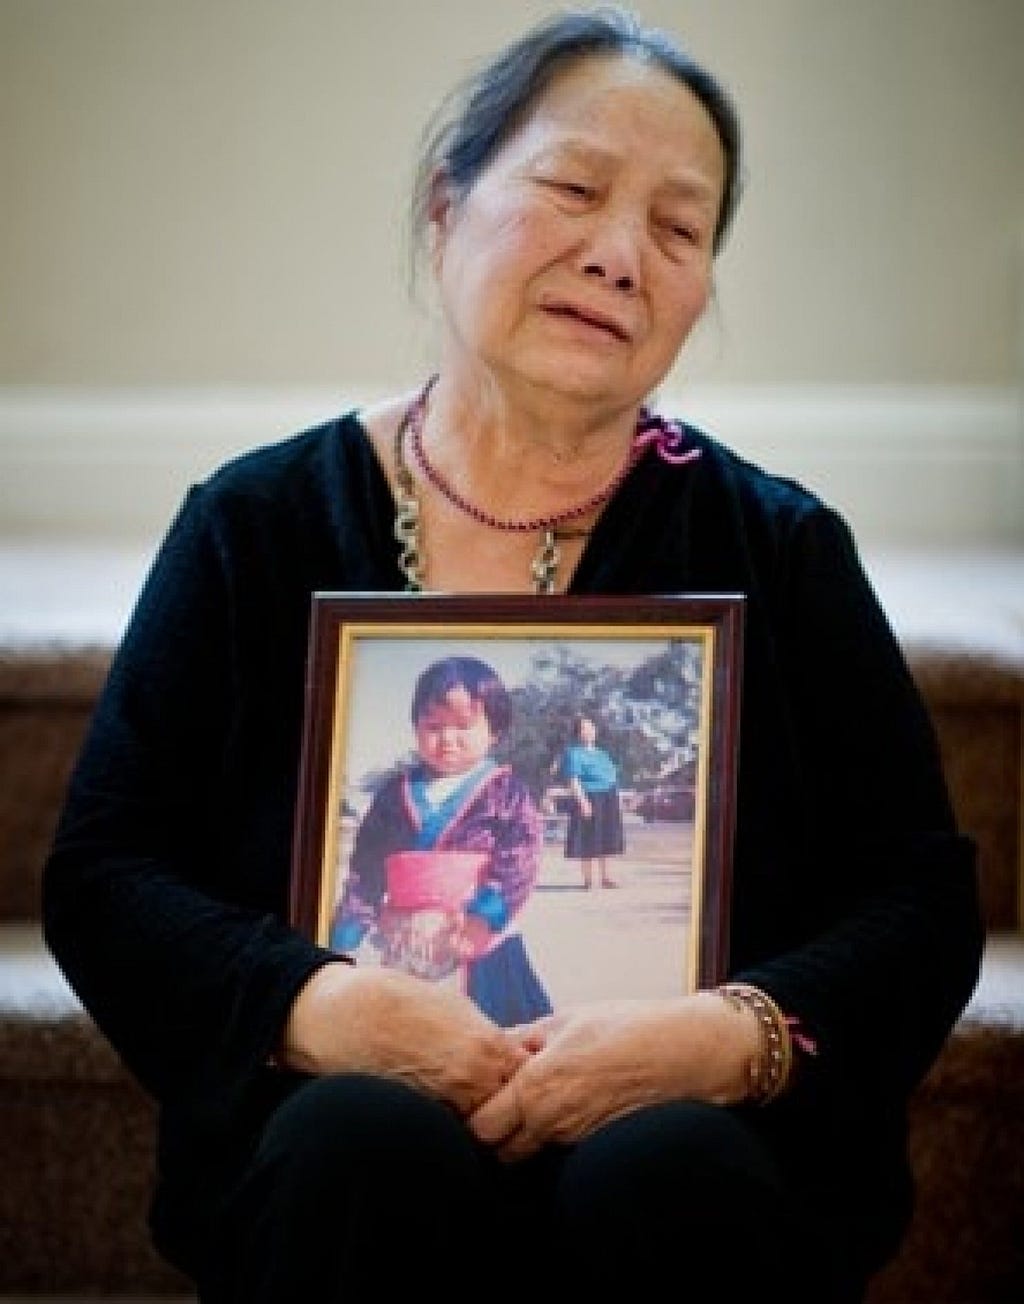 Image of Foua, mother to Lia Lee, holding a portrait of Lia at their funeral procession.